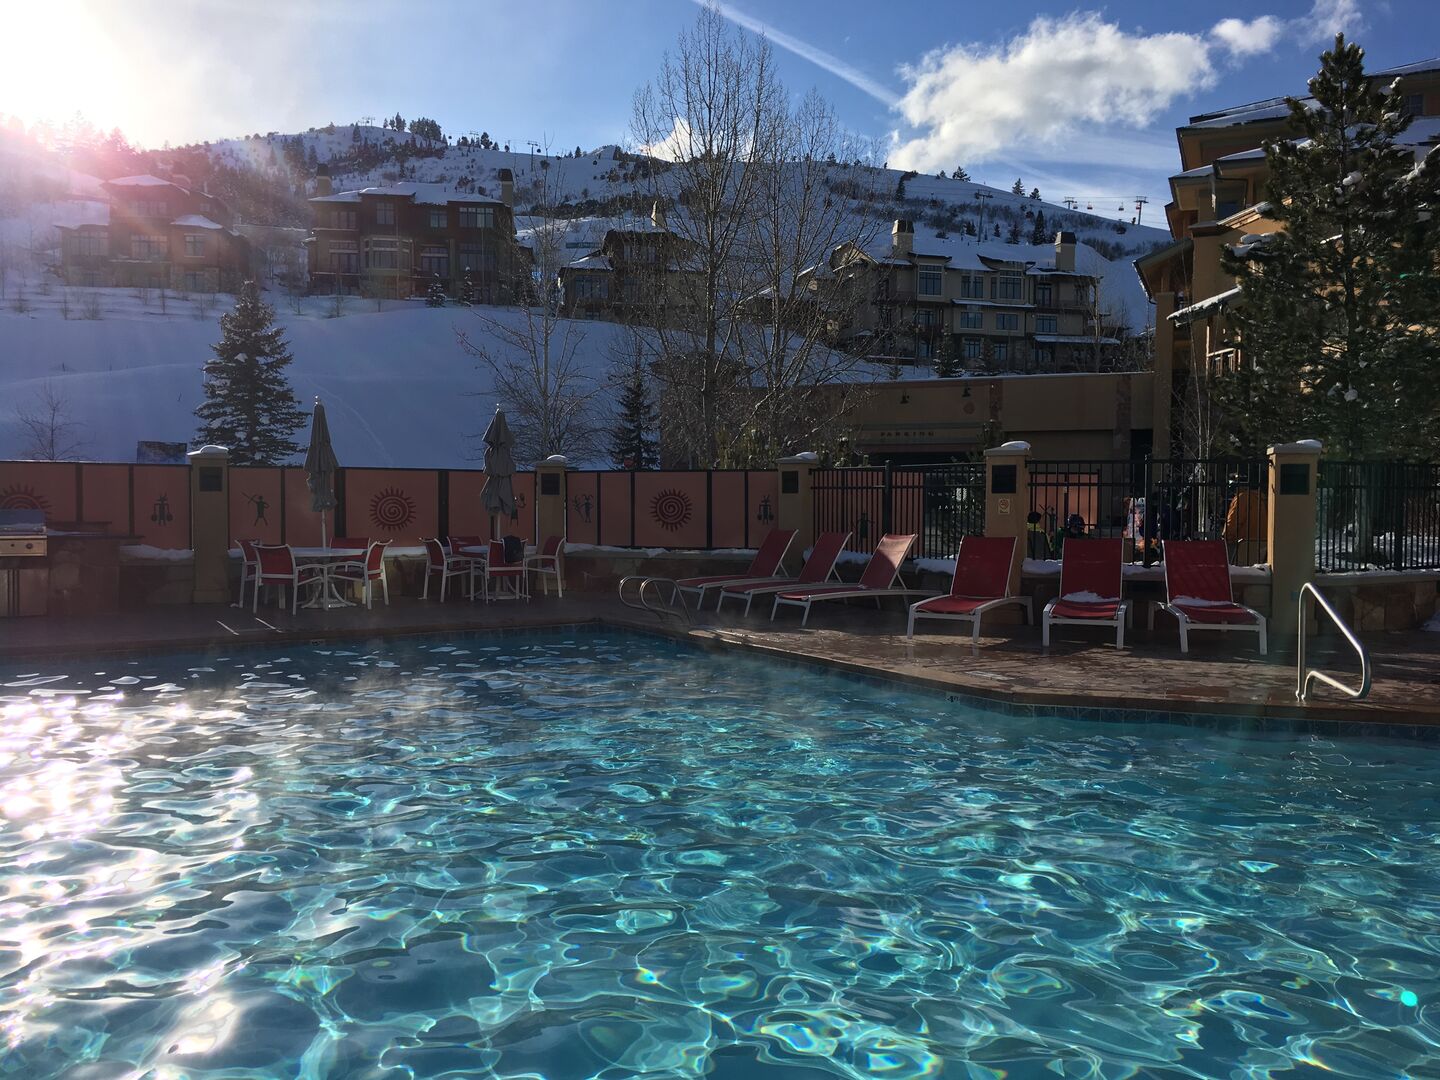 Year round nicely heated pool